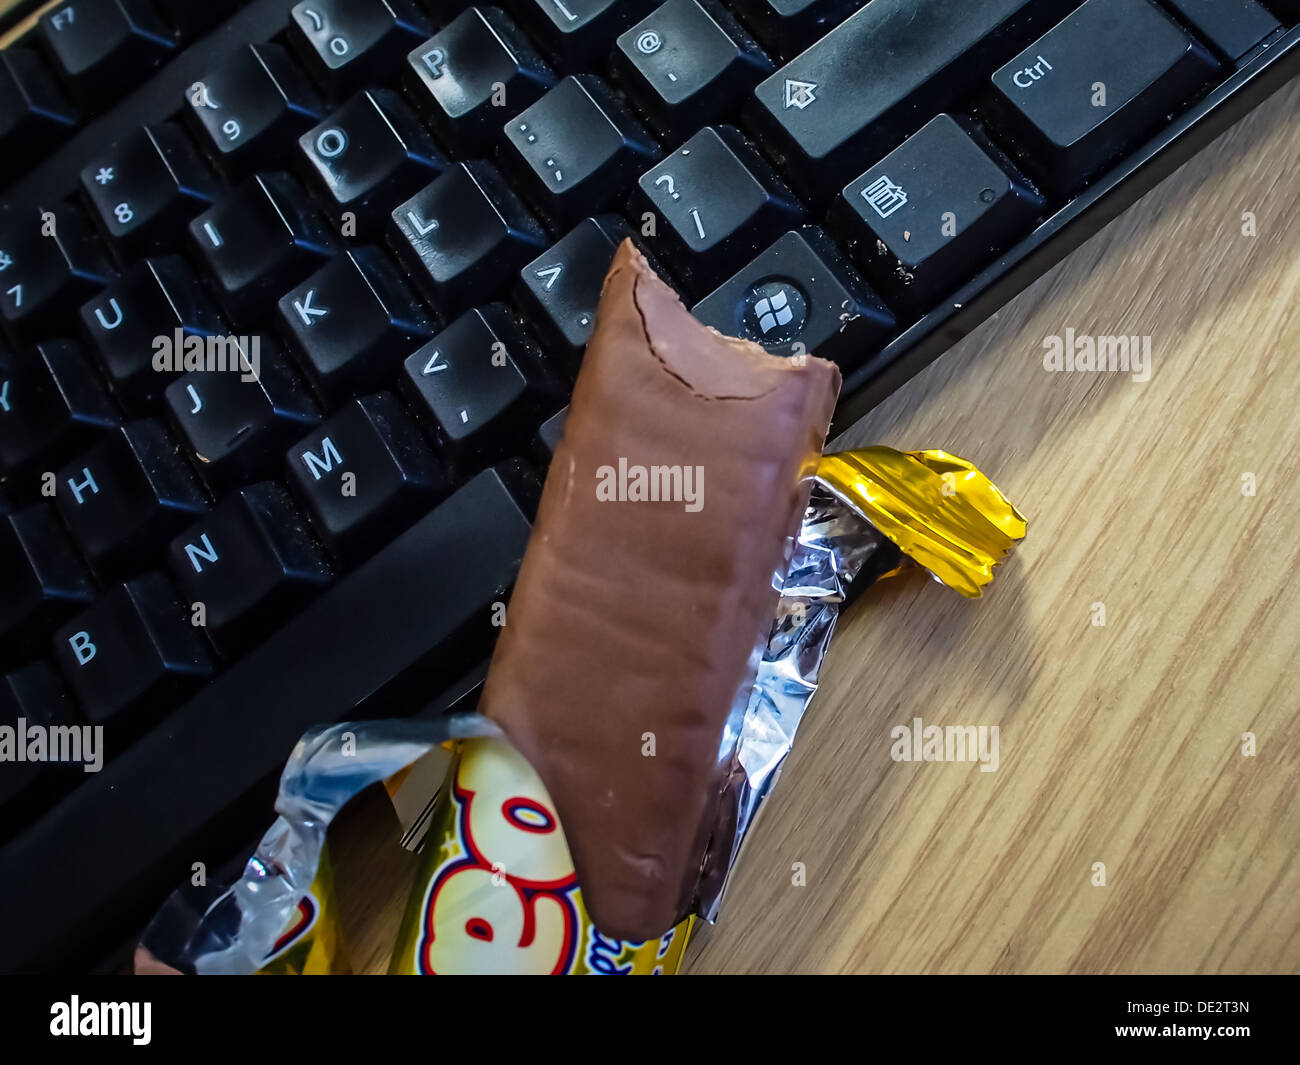 A chocolate bar on a dirty keyboard caused by snacking at a work station Stock Photo